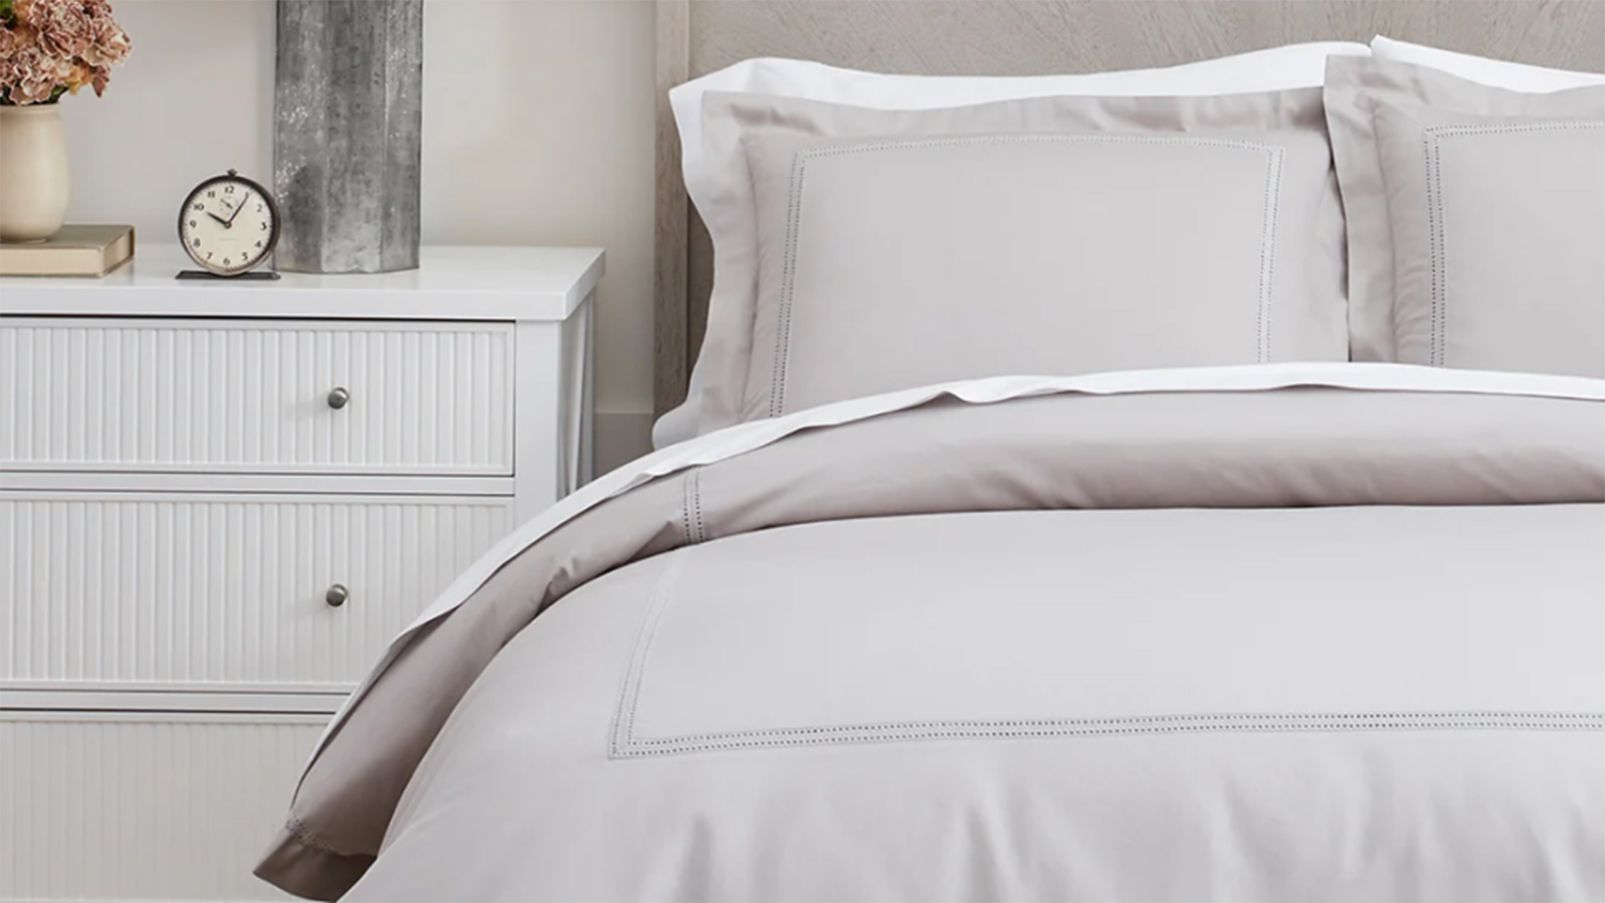 s Best-Selling Mellanni Sheets Are on Sale for Just $30